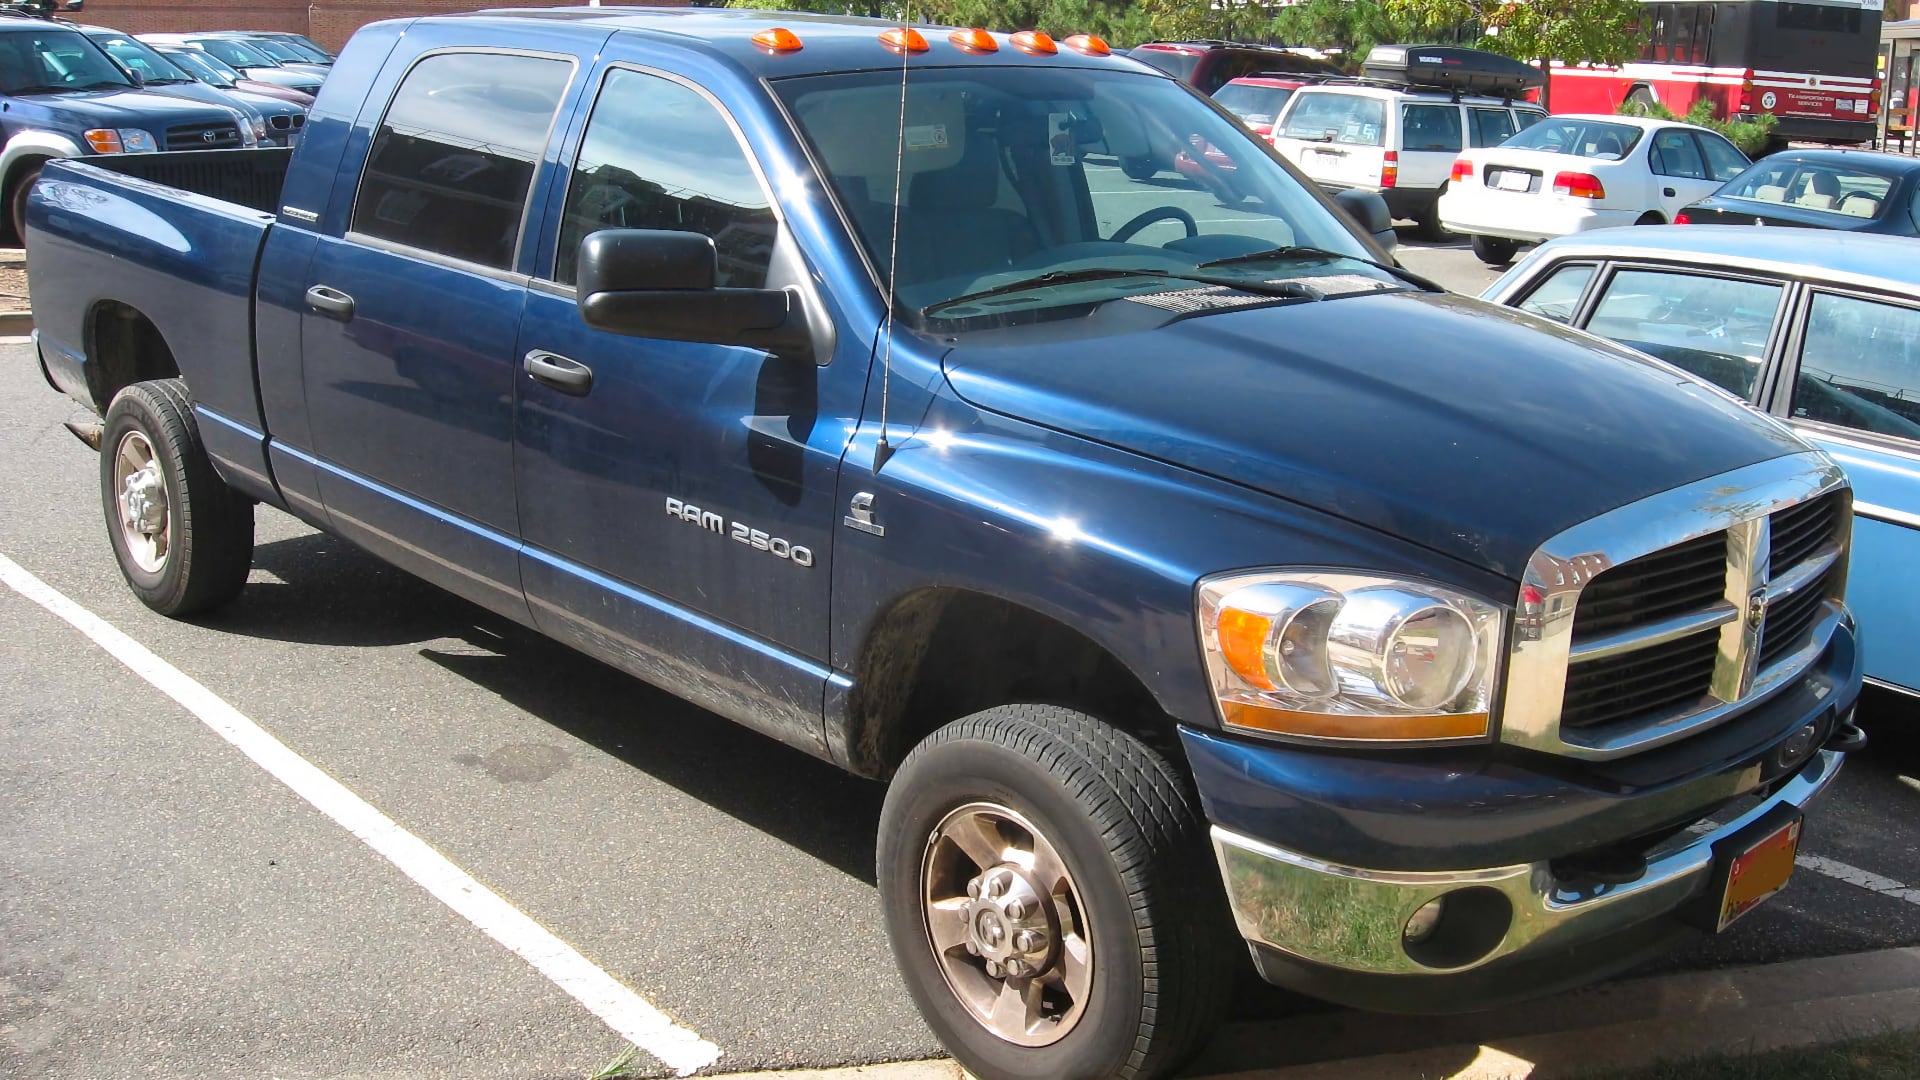 a blue pickup truck parked in a parking lot.